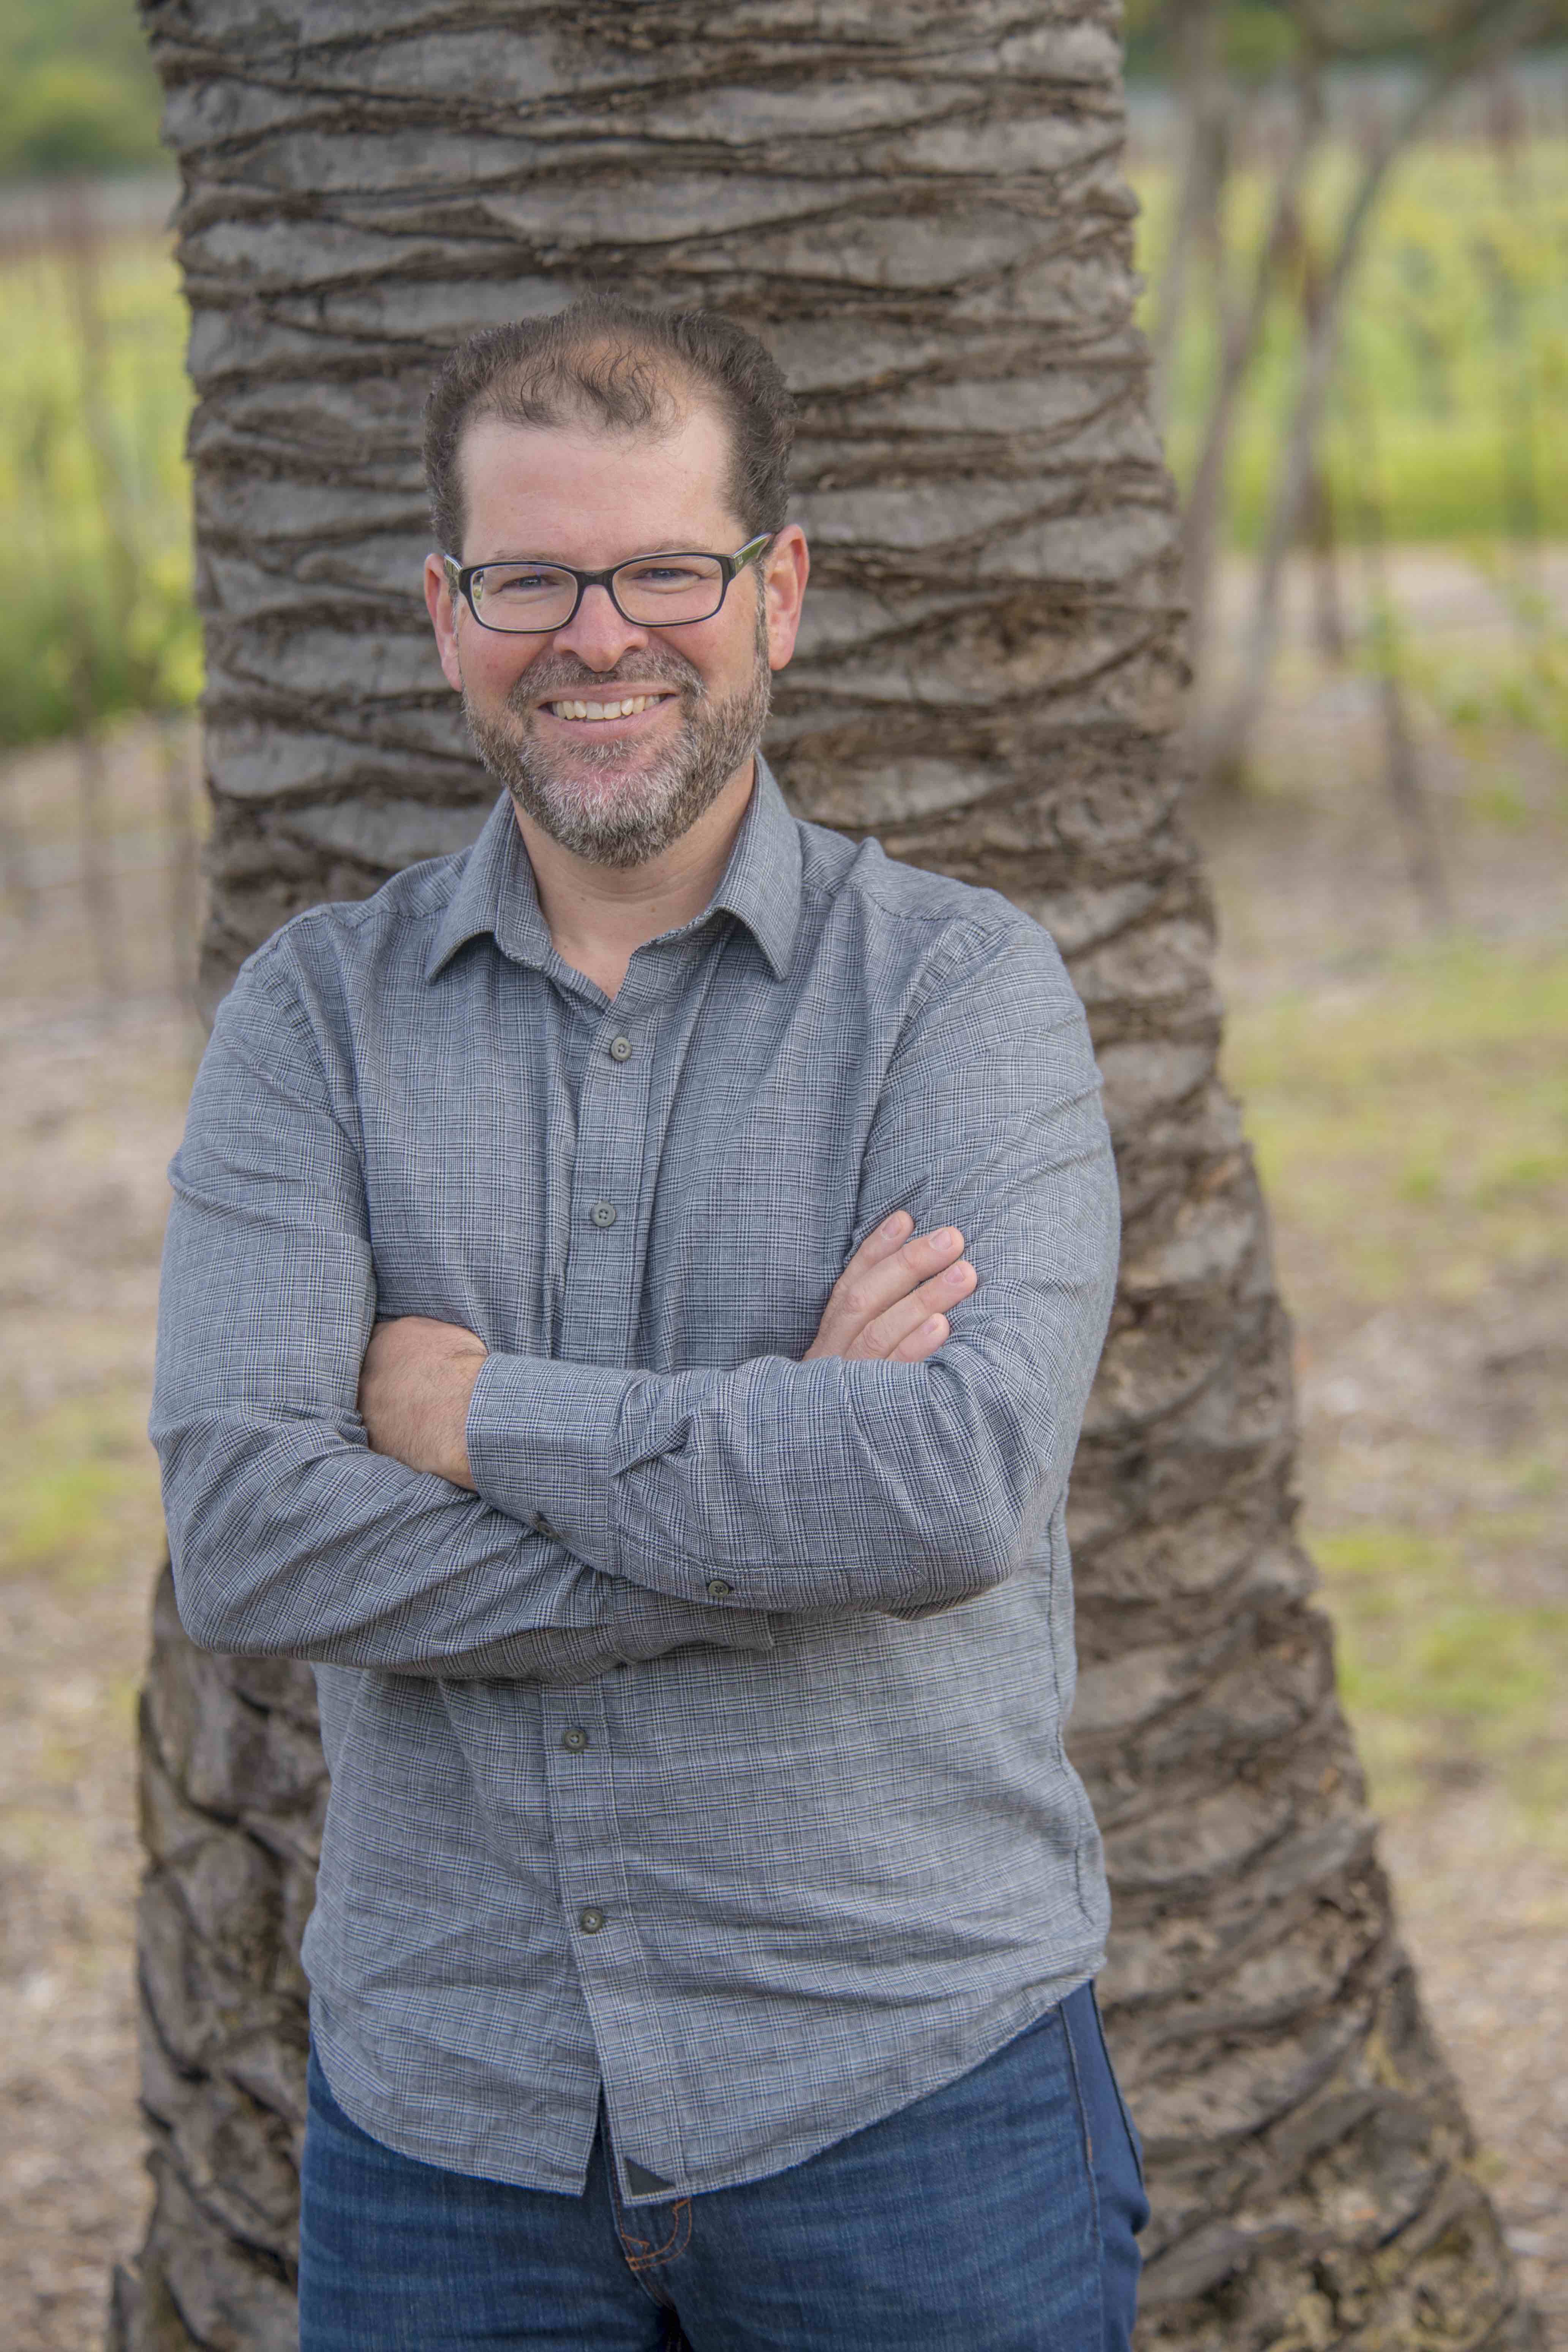 Winemaker Chris Pisani has been promoted to Senior Winemaker at ZD Wines.